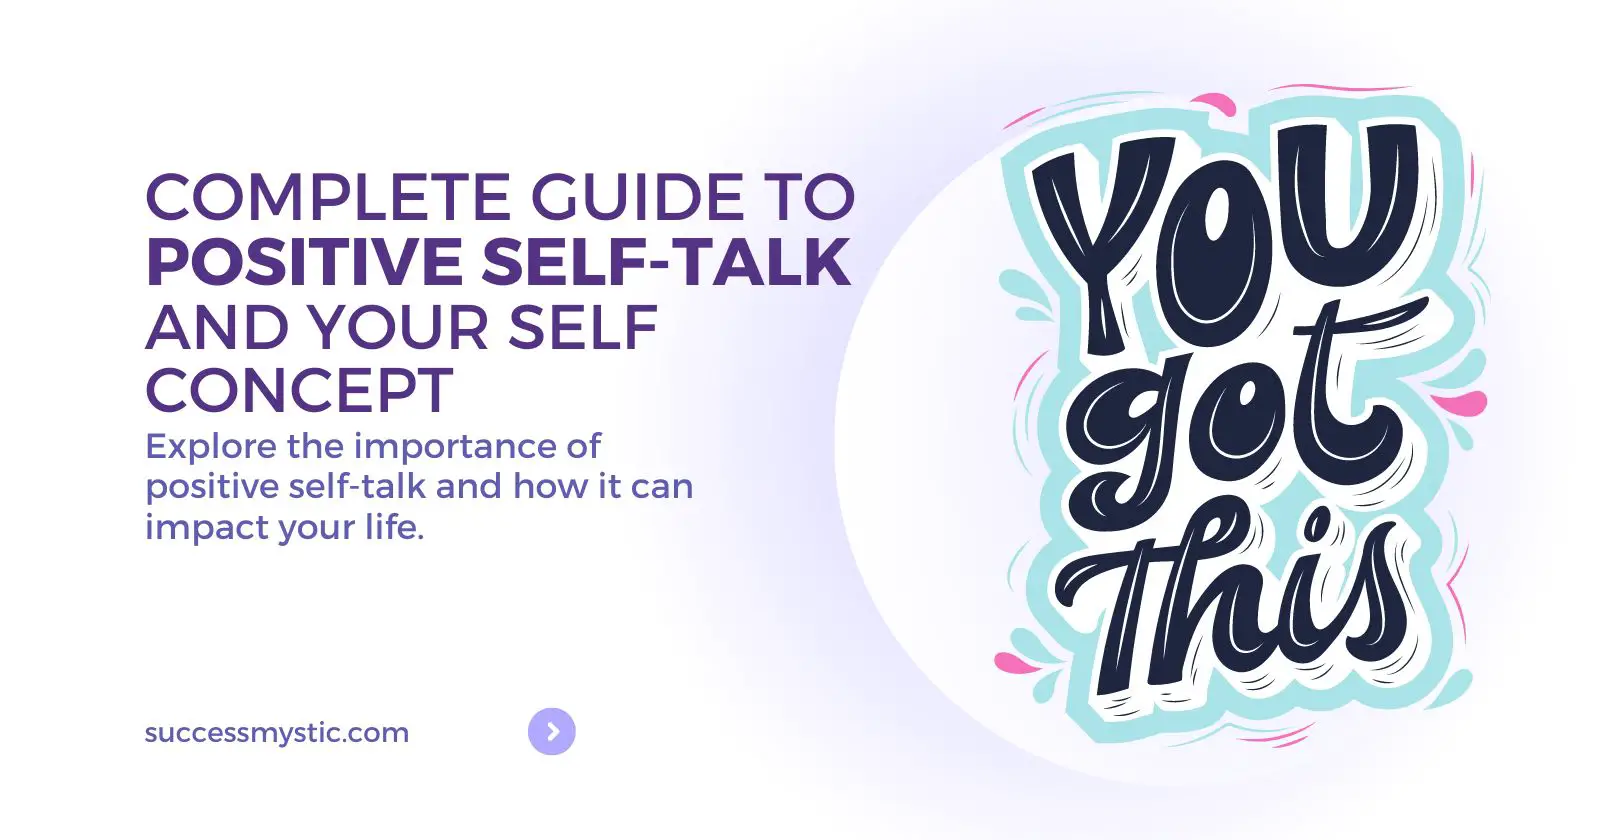 The Complete Guide To Positive Self-Talk